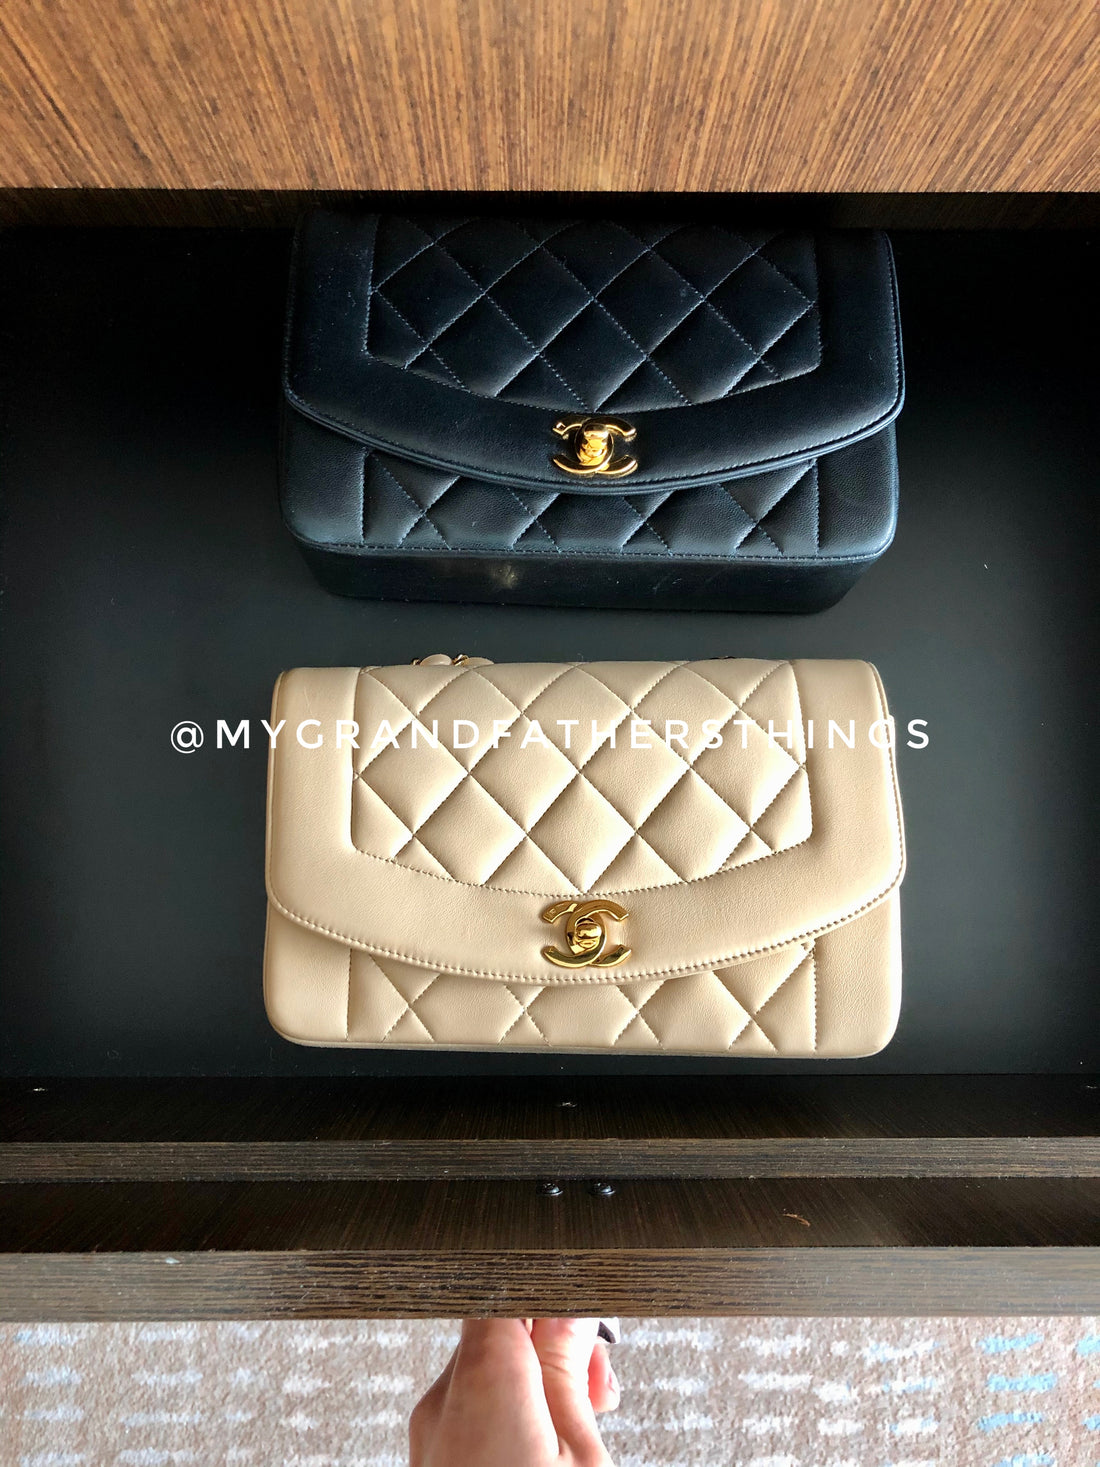 How to store my vintage Chanel Diana bag?